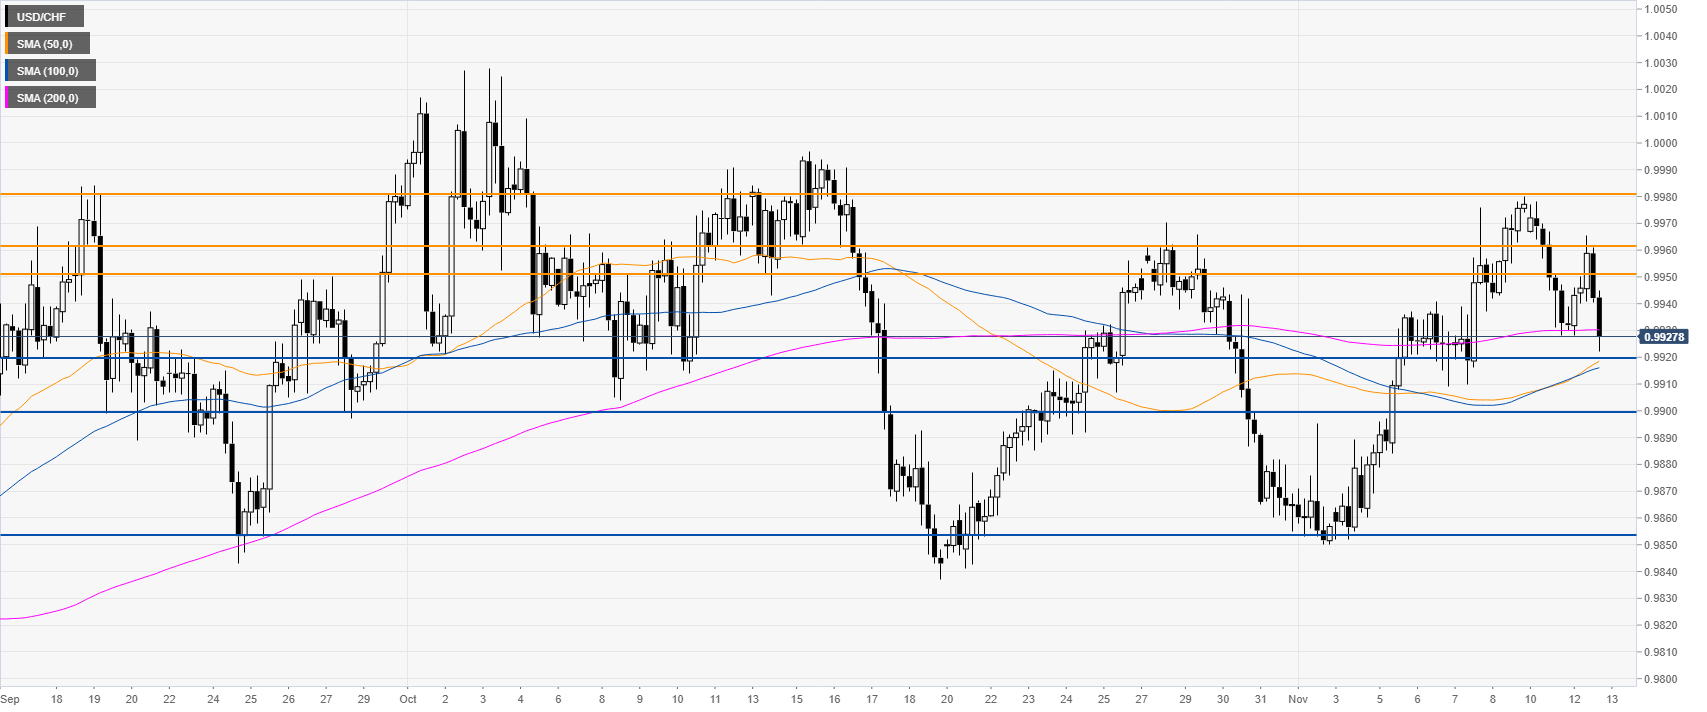 USD/CHF technical analysis: Greenback loses steam against Swissy, trades near 0.9930 level